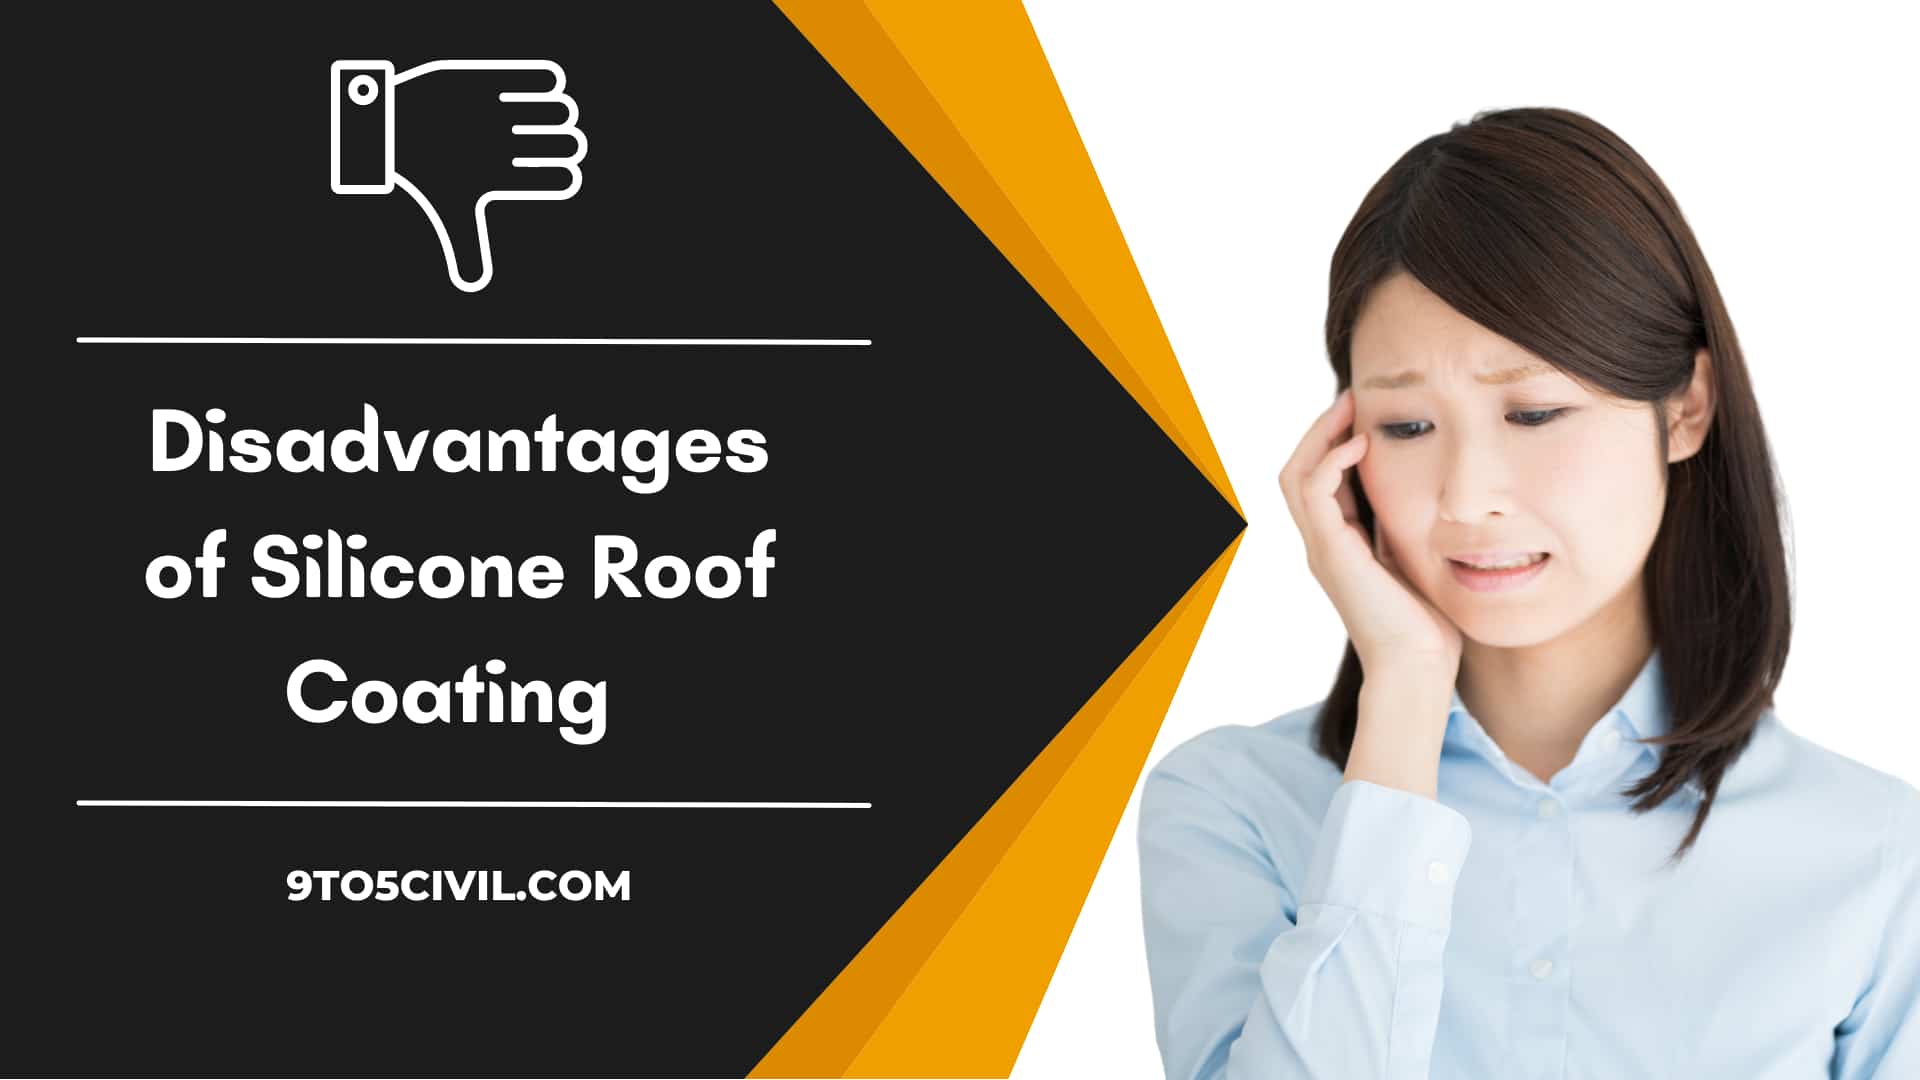 Disadvantages of Silicone Roof Coating